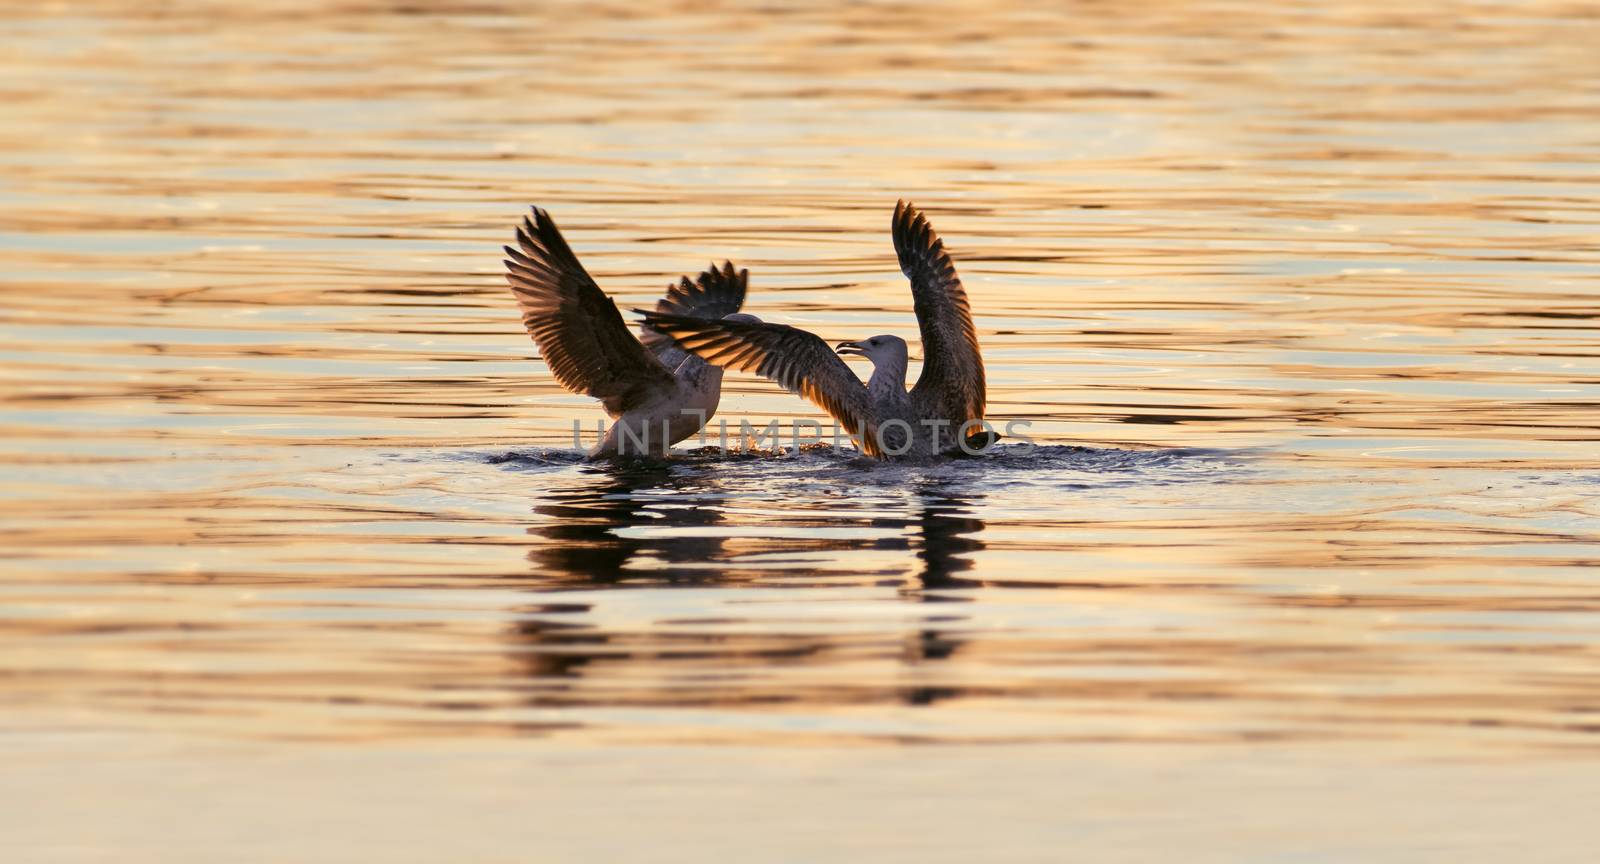 Seagulls fighting over a fish in the mediterranean sea at sunset.